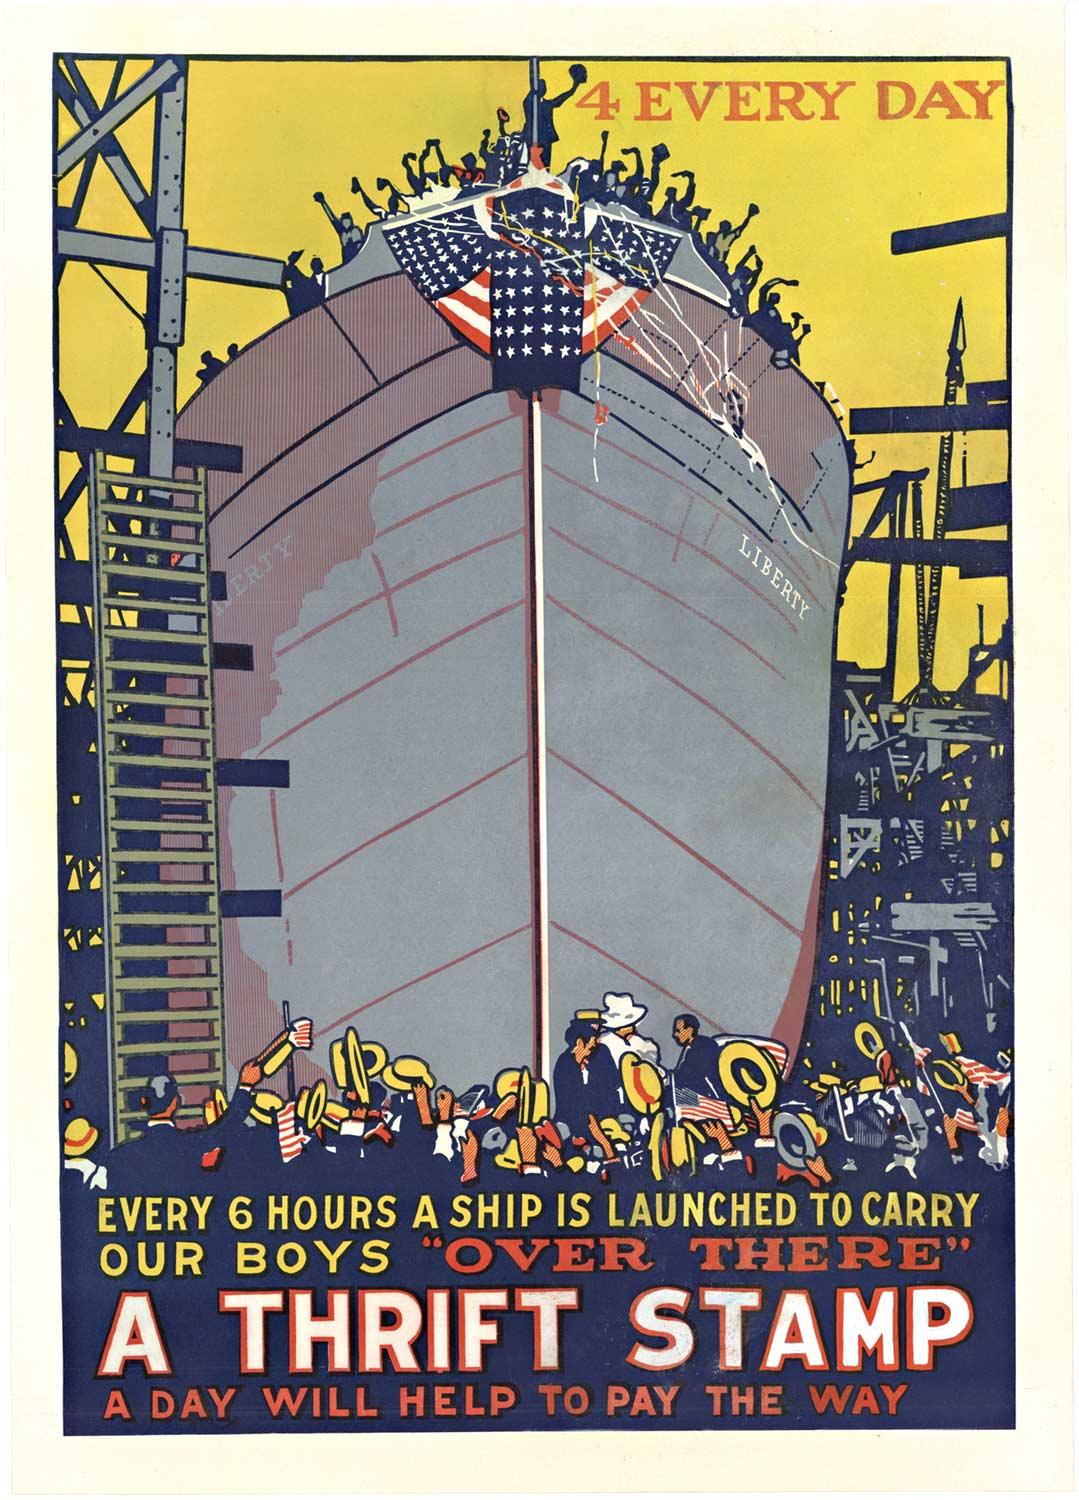 Unknown Figurative Print - Original WW1 "Every 6 Hours a Ship is Launched" Thrift Stamp vintage poster